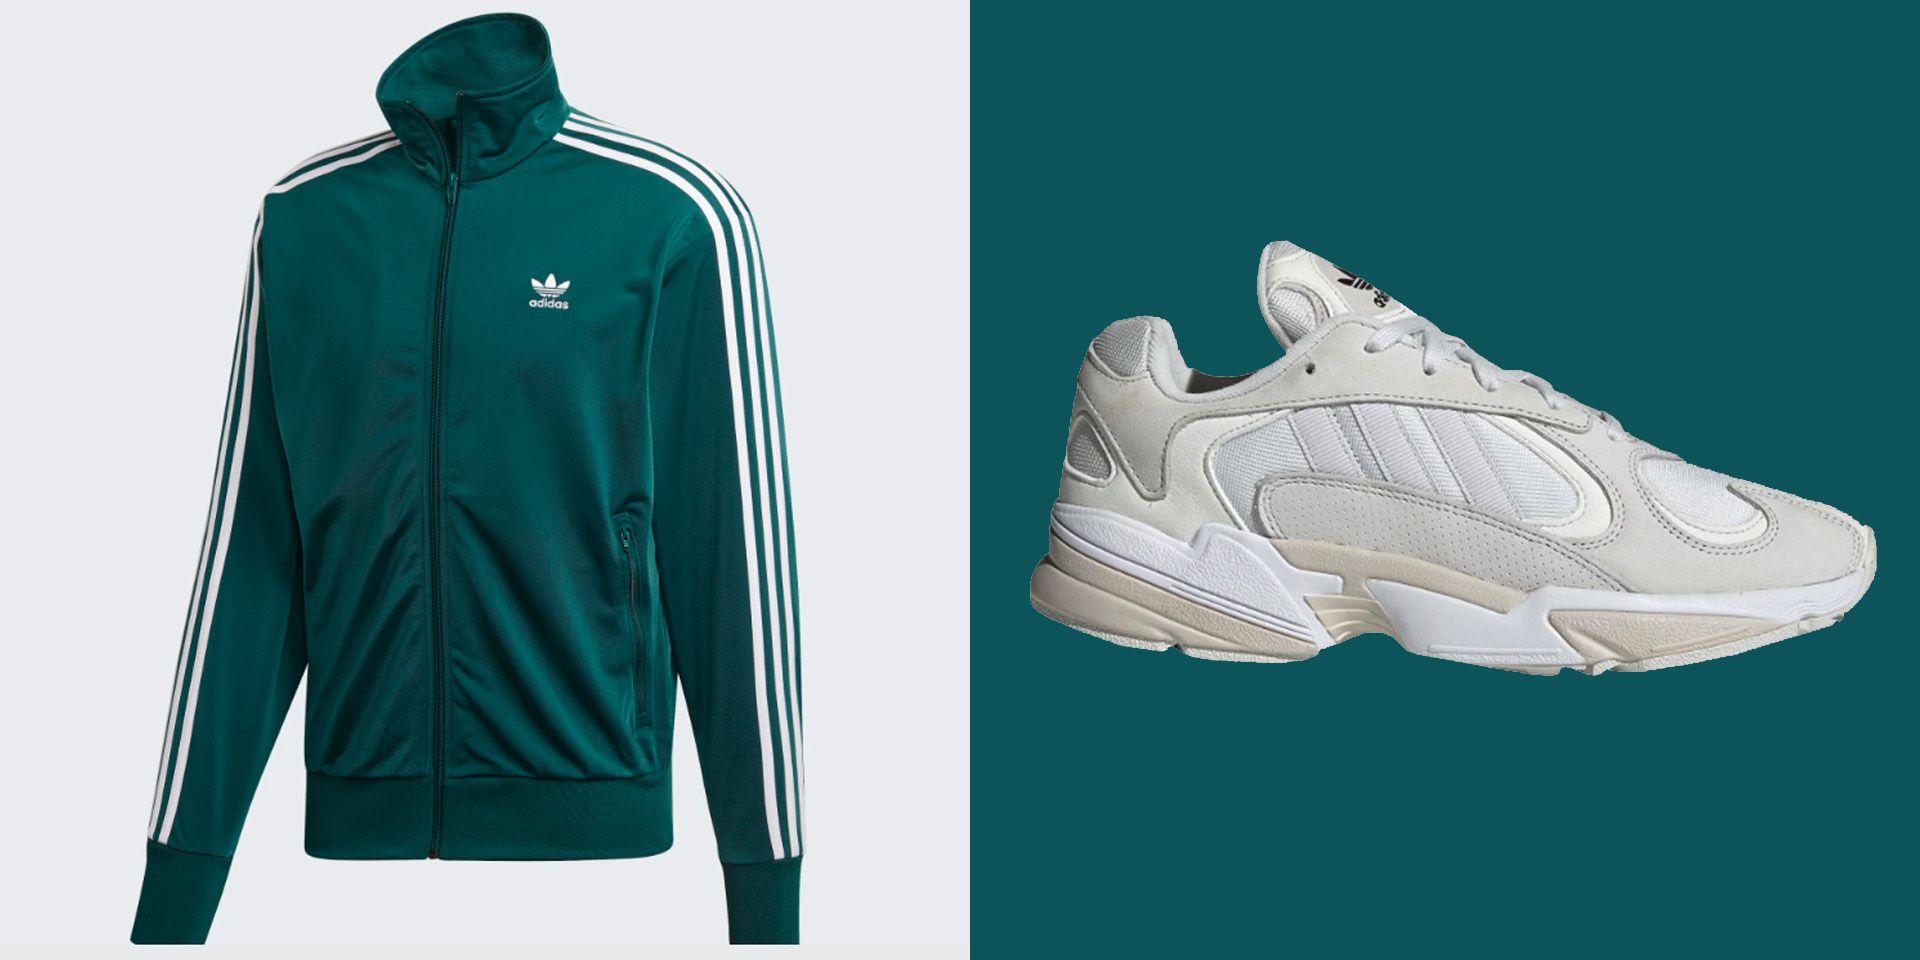 Items from Adidas 20 Percent Off Fall Sale